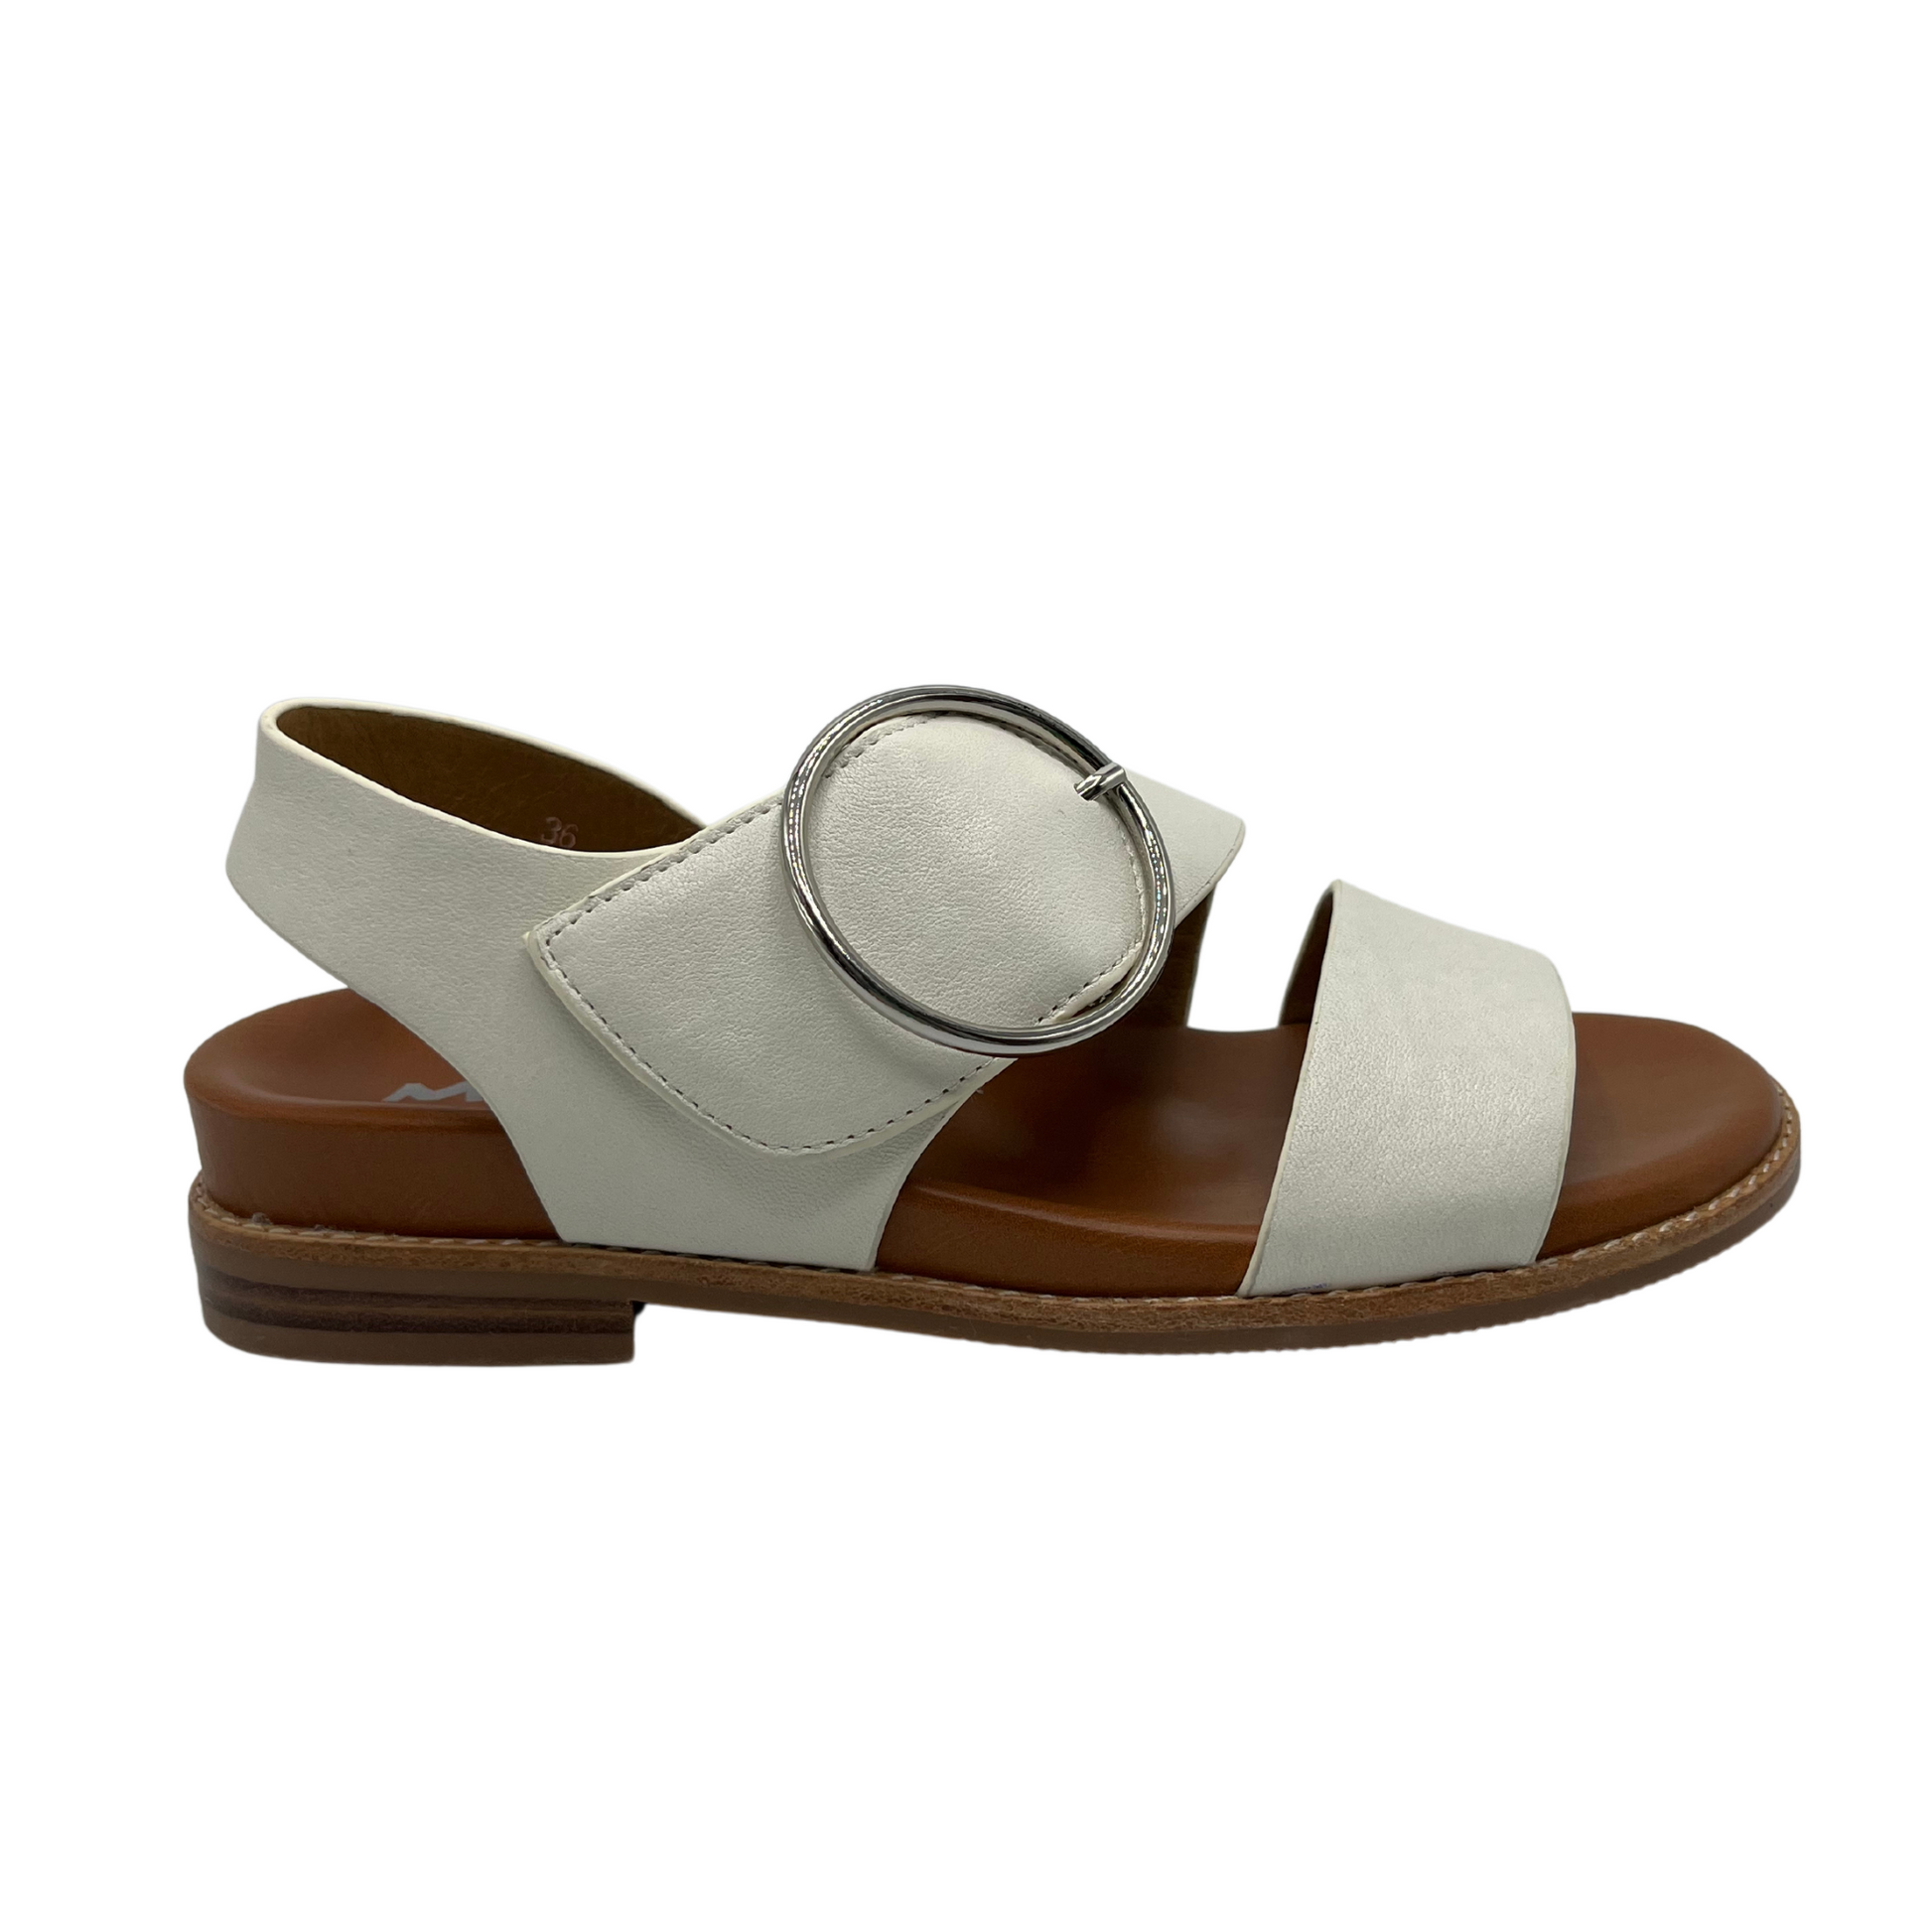 Right facing view of white leather strapped sandals with tan leather lining. Large round silver buckle and low heel